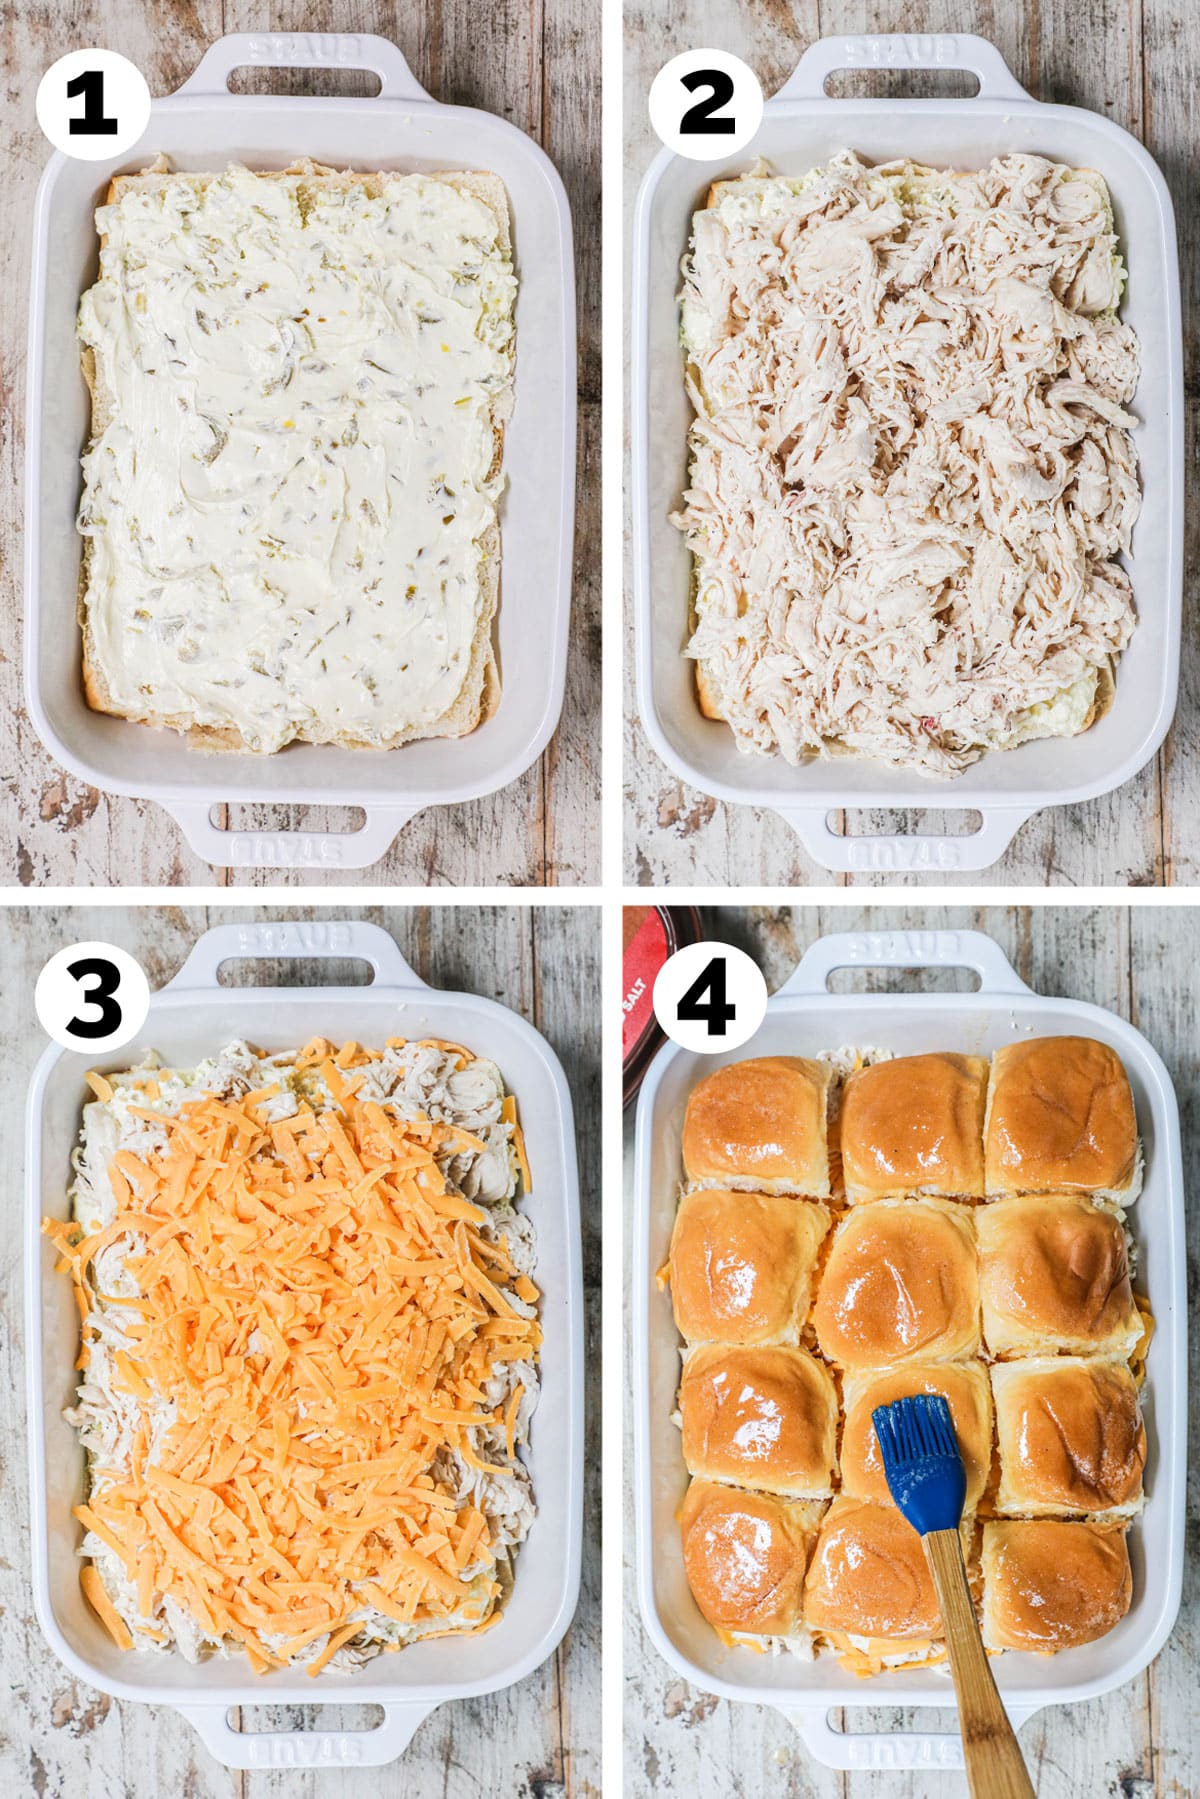 Process photos for how to make Jalapeno Popper Chicken Sliders. 1. Mix cream cheese and jalapeno peppers together and spread on hawaiian rolls.. 2. Layer on shredded chicken. 3. Top with cheddar cheese. 4. Spread melted butter and Lowery's seasoning salt on the top of the rolls and bake.